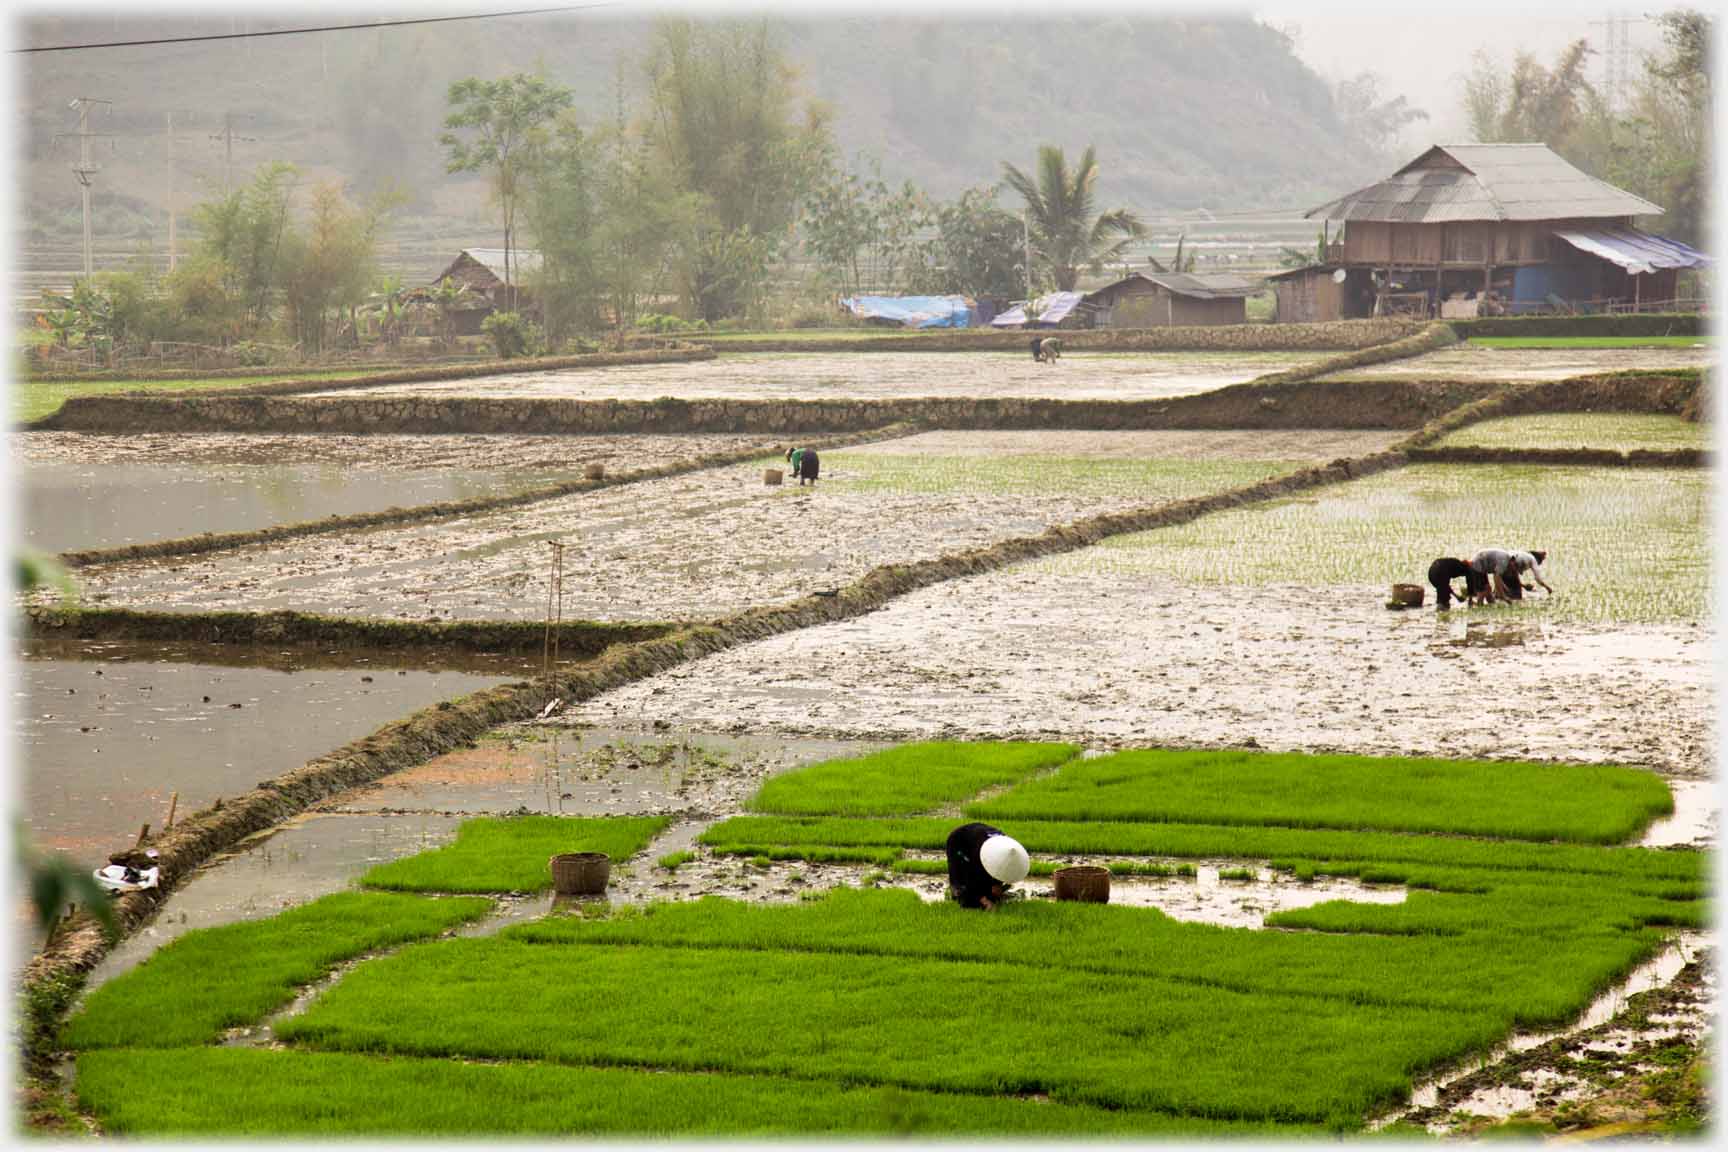 Near fields deep green with woman bending in them, other mud fields with women, house in background.